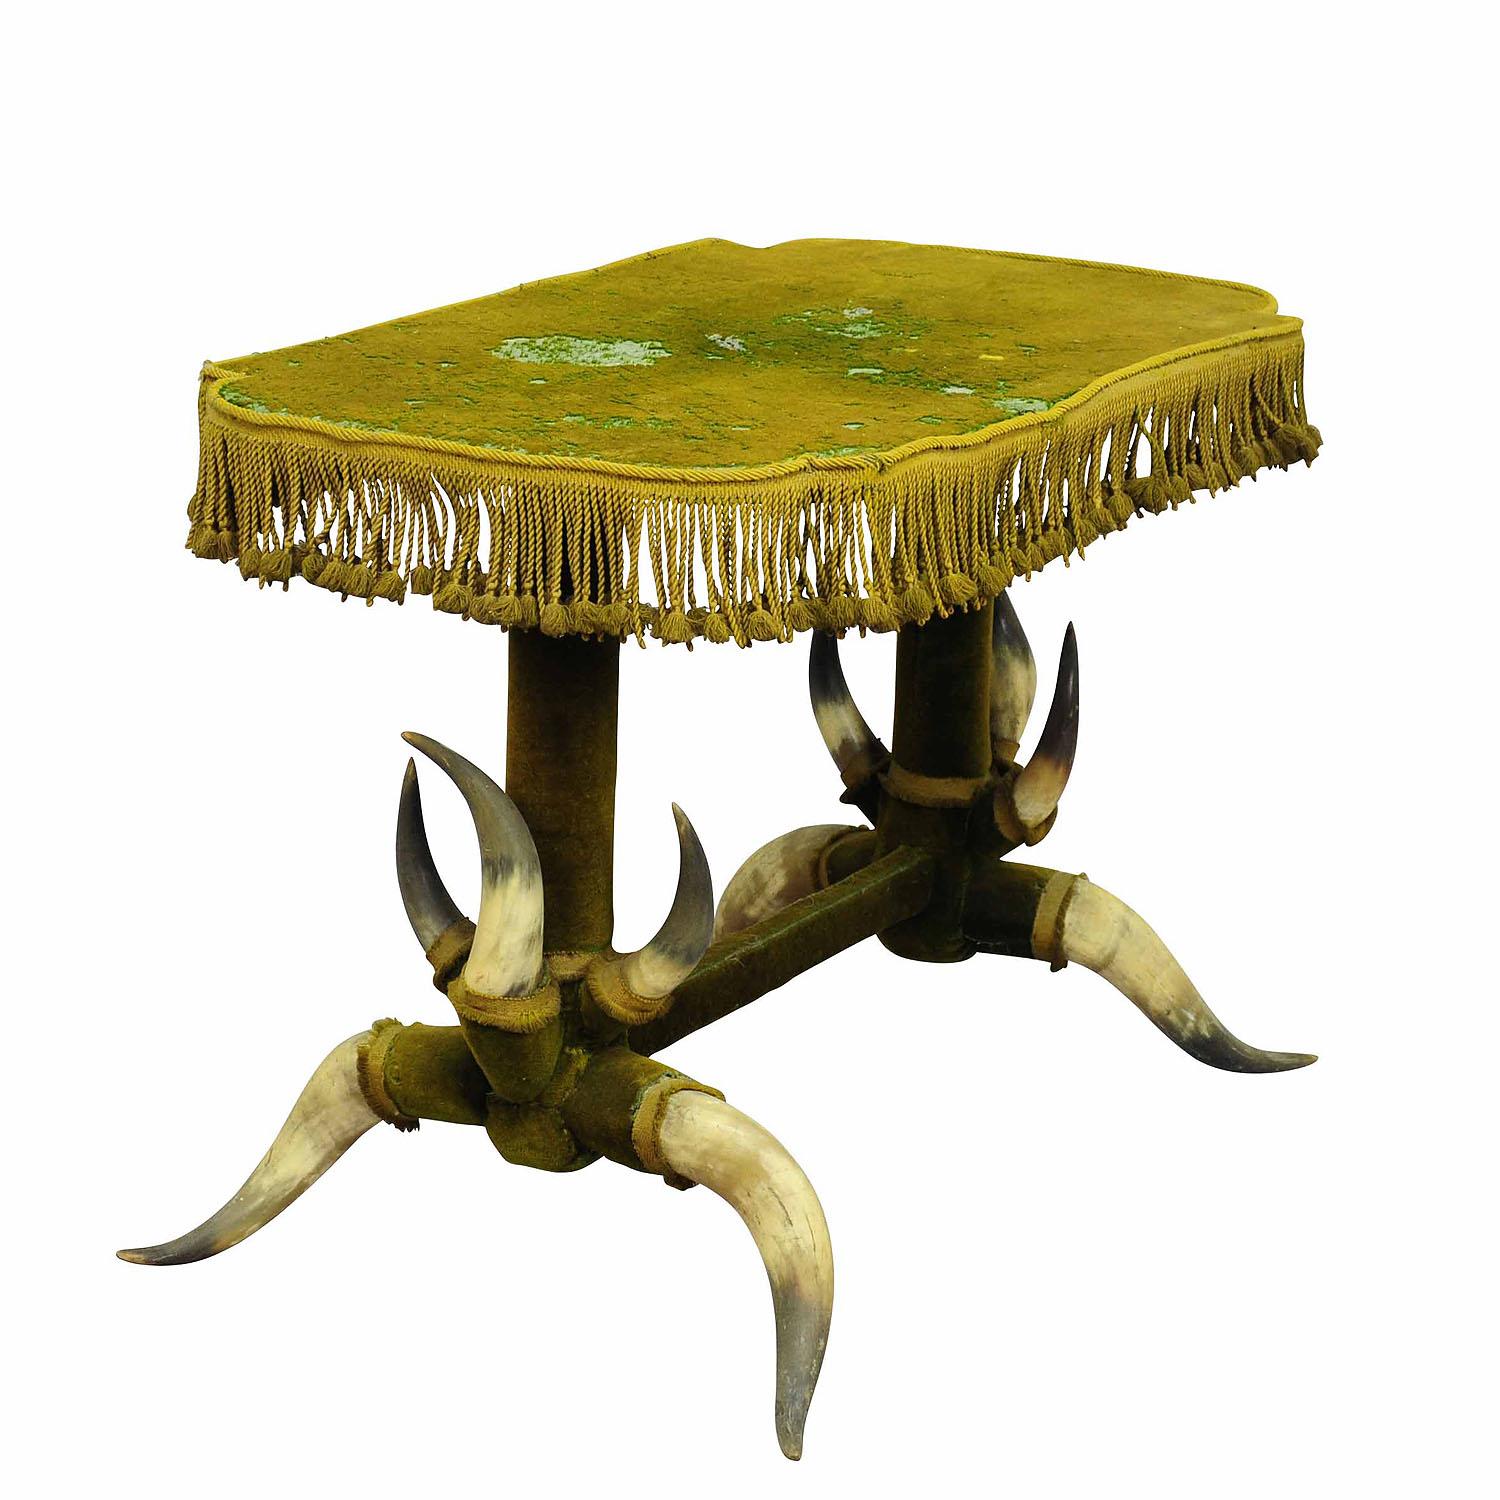 Antique Bull Antler Table with Green Velvet ca. 1870

A bull antler table ca. 1870, covered with original green velvet which has to be renewed (is loosing the hairs). It is manufactured in Austria ca. 1870.

At the beginning of the 19th century the